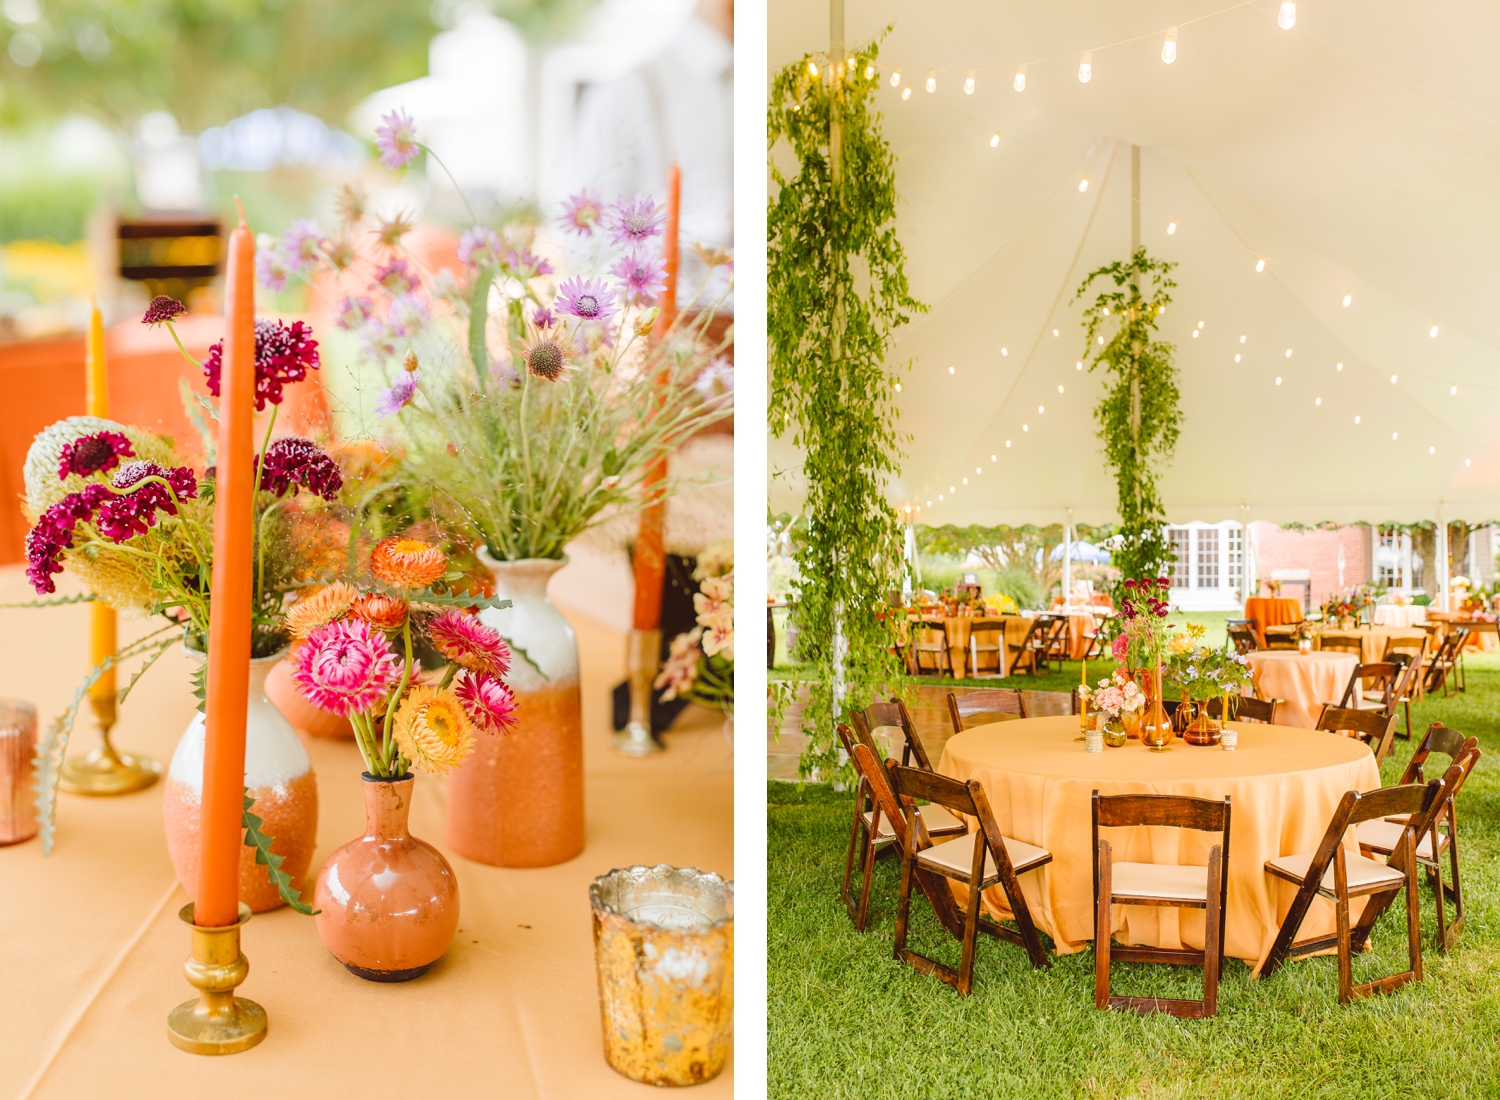 Pink, purple, and yellow flowers in random mix of vases with taper candles | reception tables covered in orange table cloths with colorful floral centerpieces | Brooke Michelle Photography